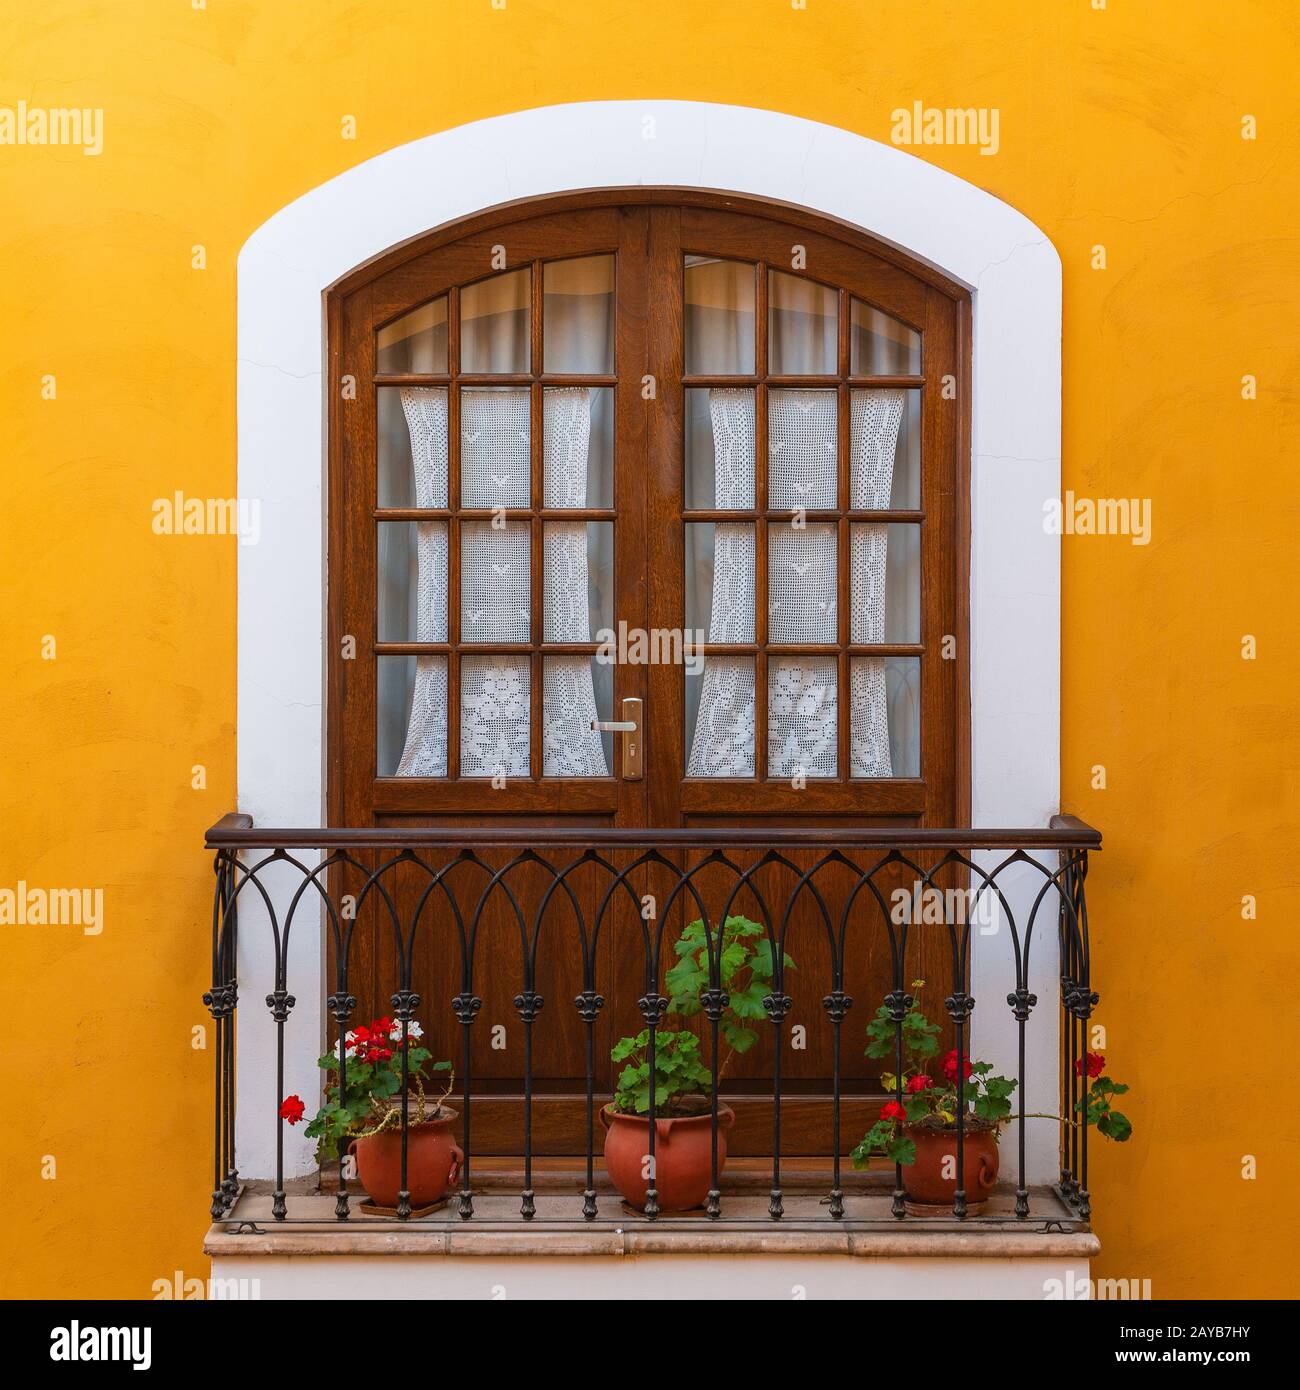 Balcony in the city center of Sucre city decorated with flowers and a yellow colonial style facade, Bolivia. Stock Photo